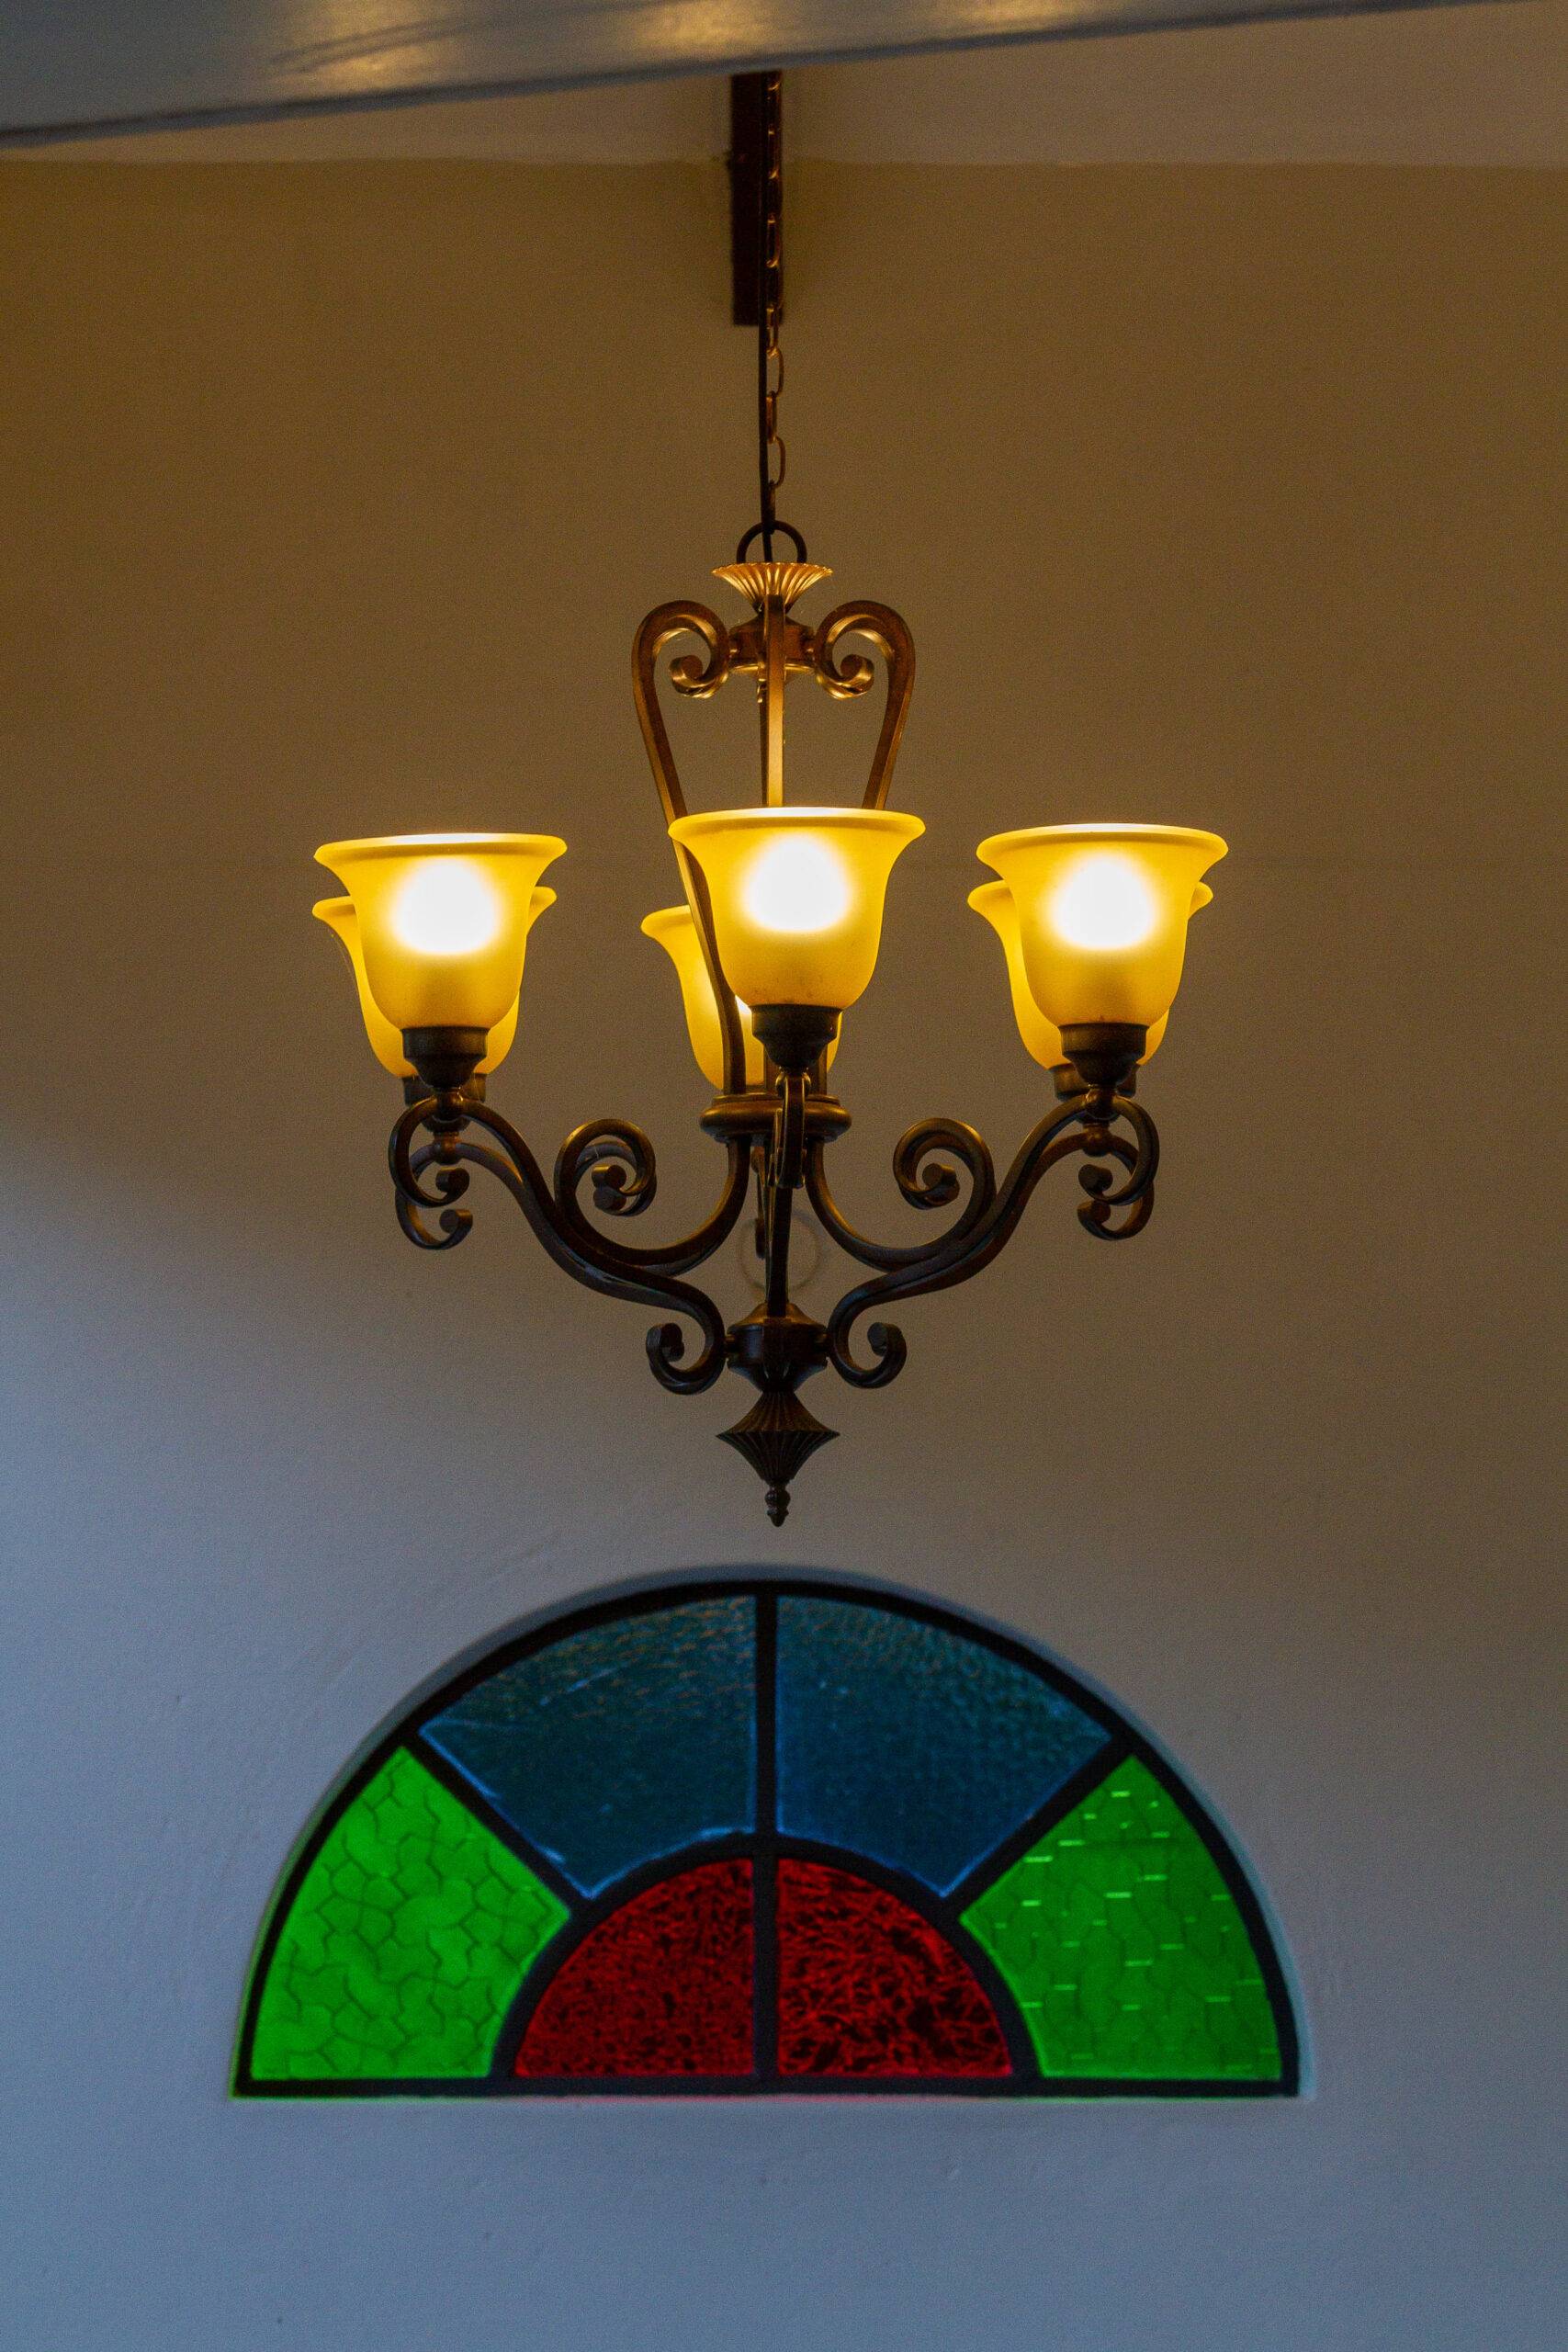 Chandelier and Stained glass window at The Courtney Lodge